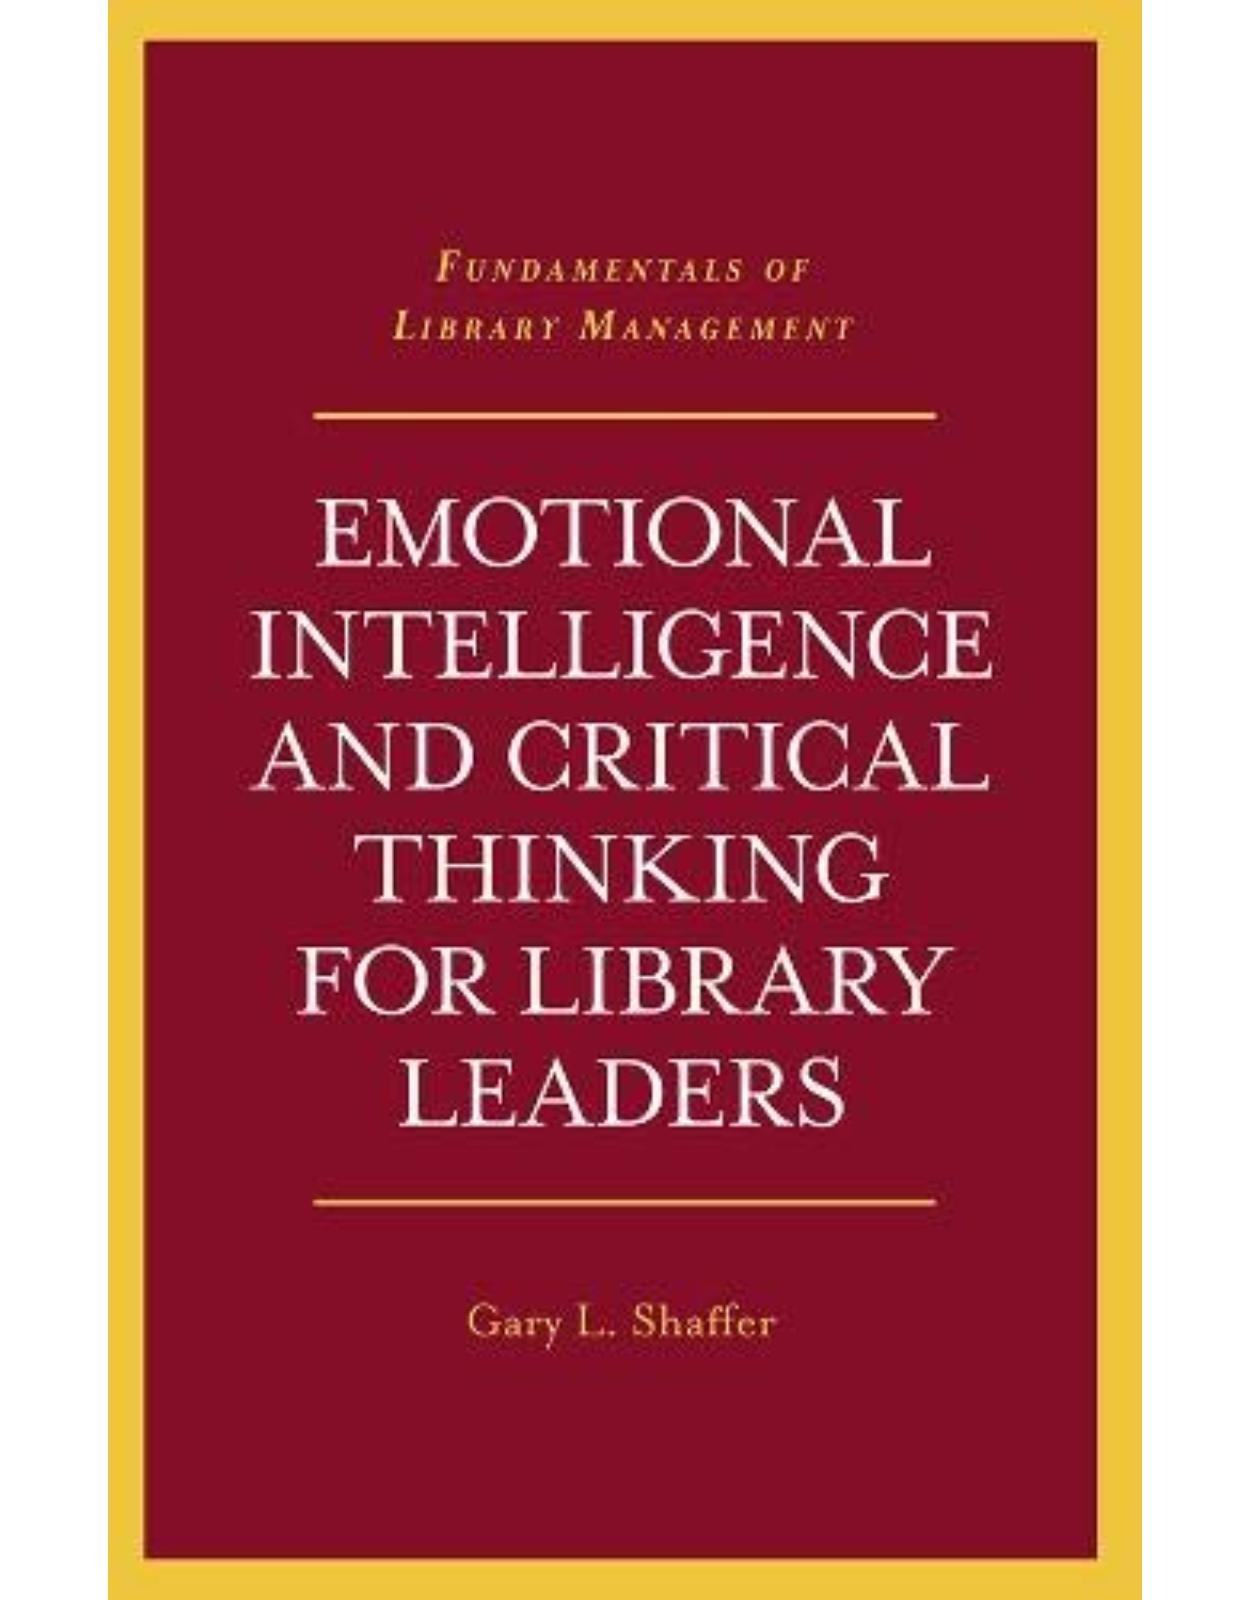 Emotional Intelligence and Critical Thinking for Library Leaders (Fundamentals of Library Management) 